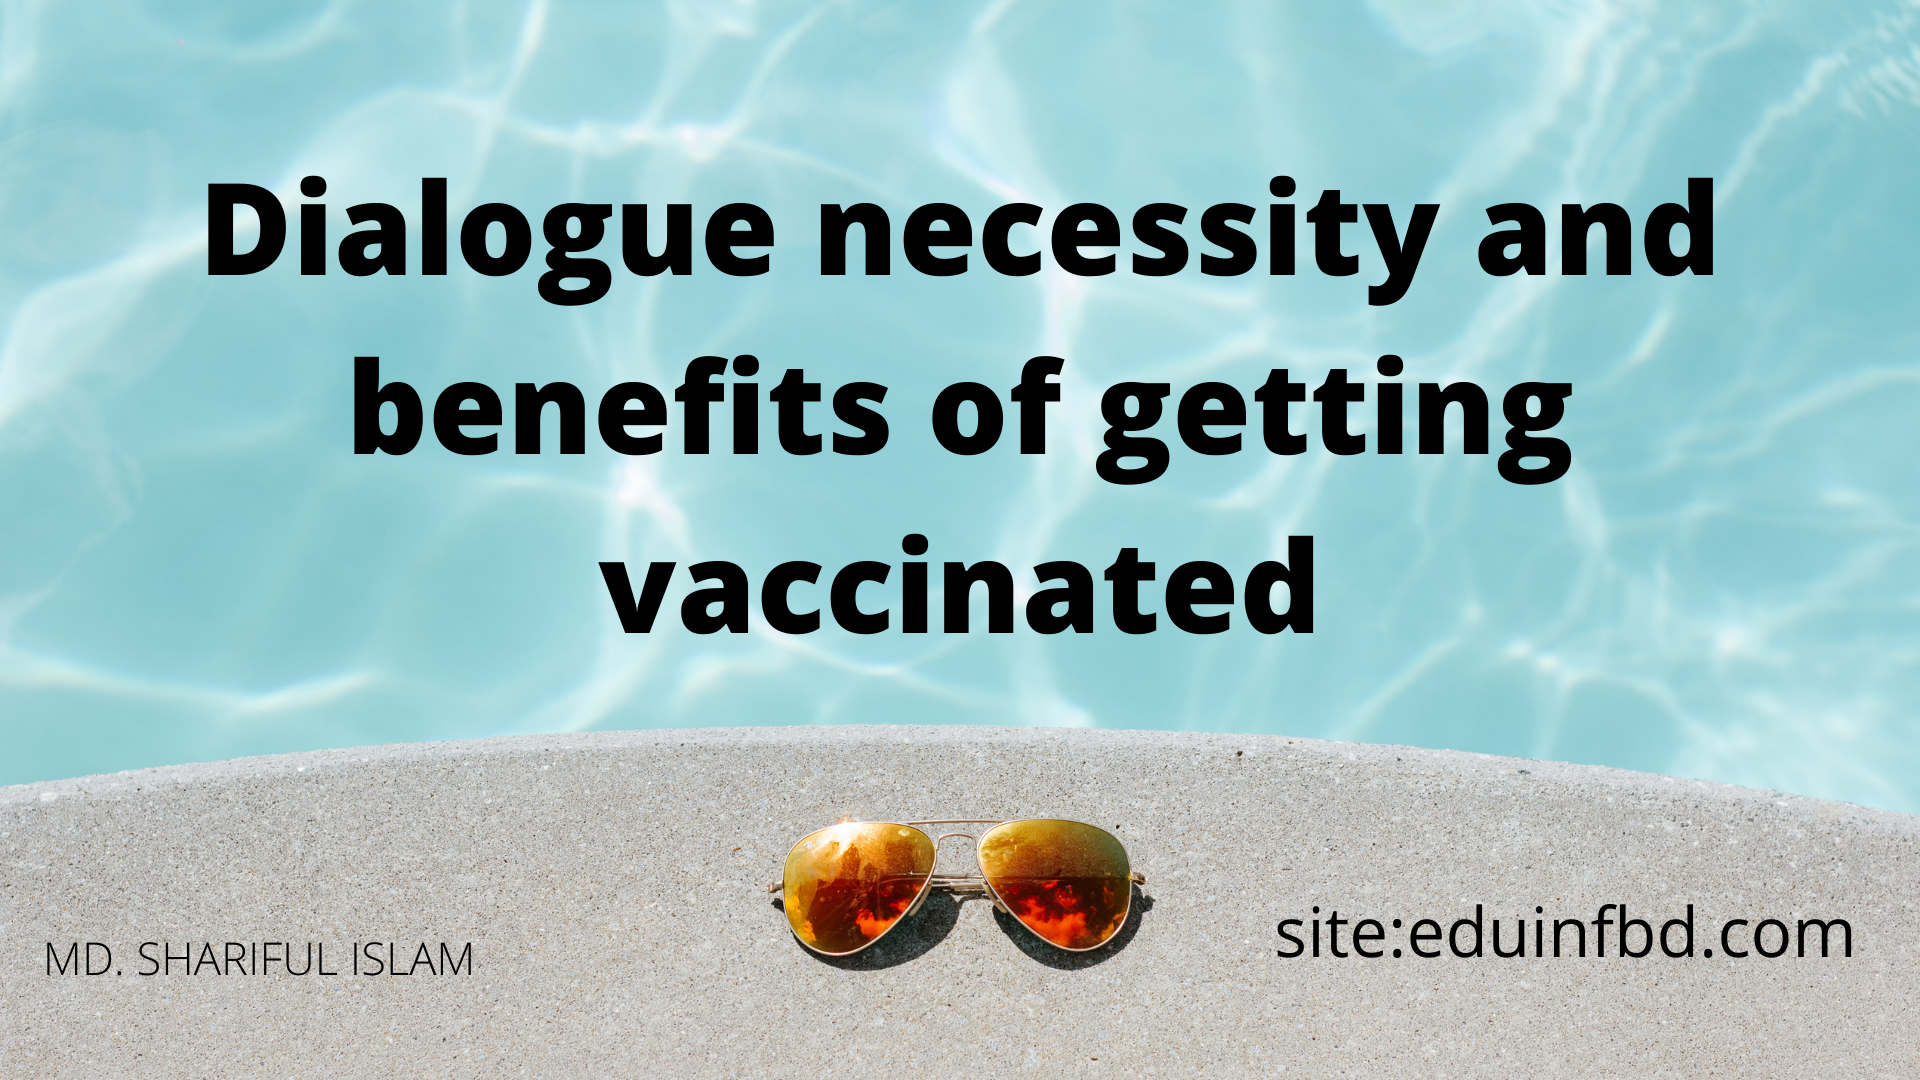 Dialogue necessity and benefits of getting vaccinated